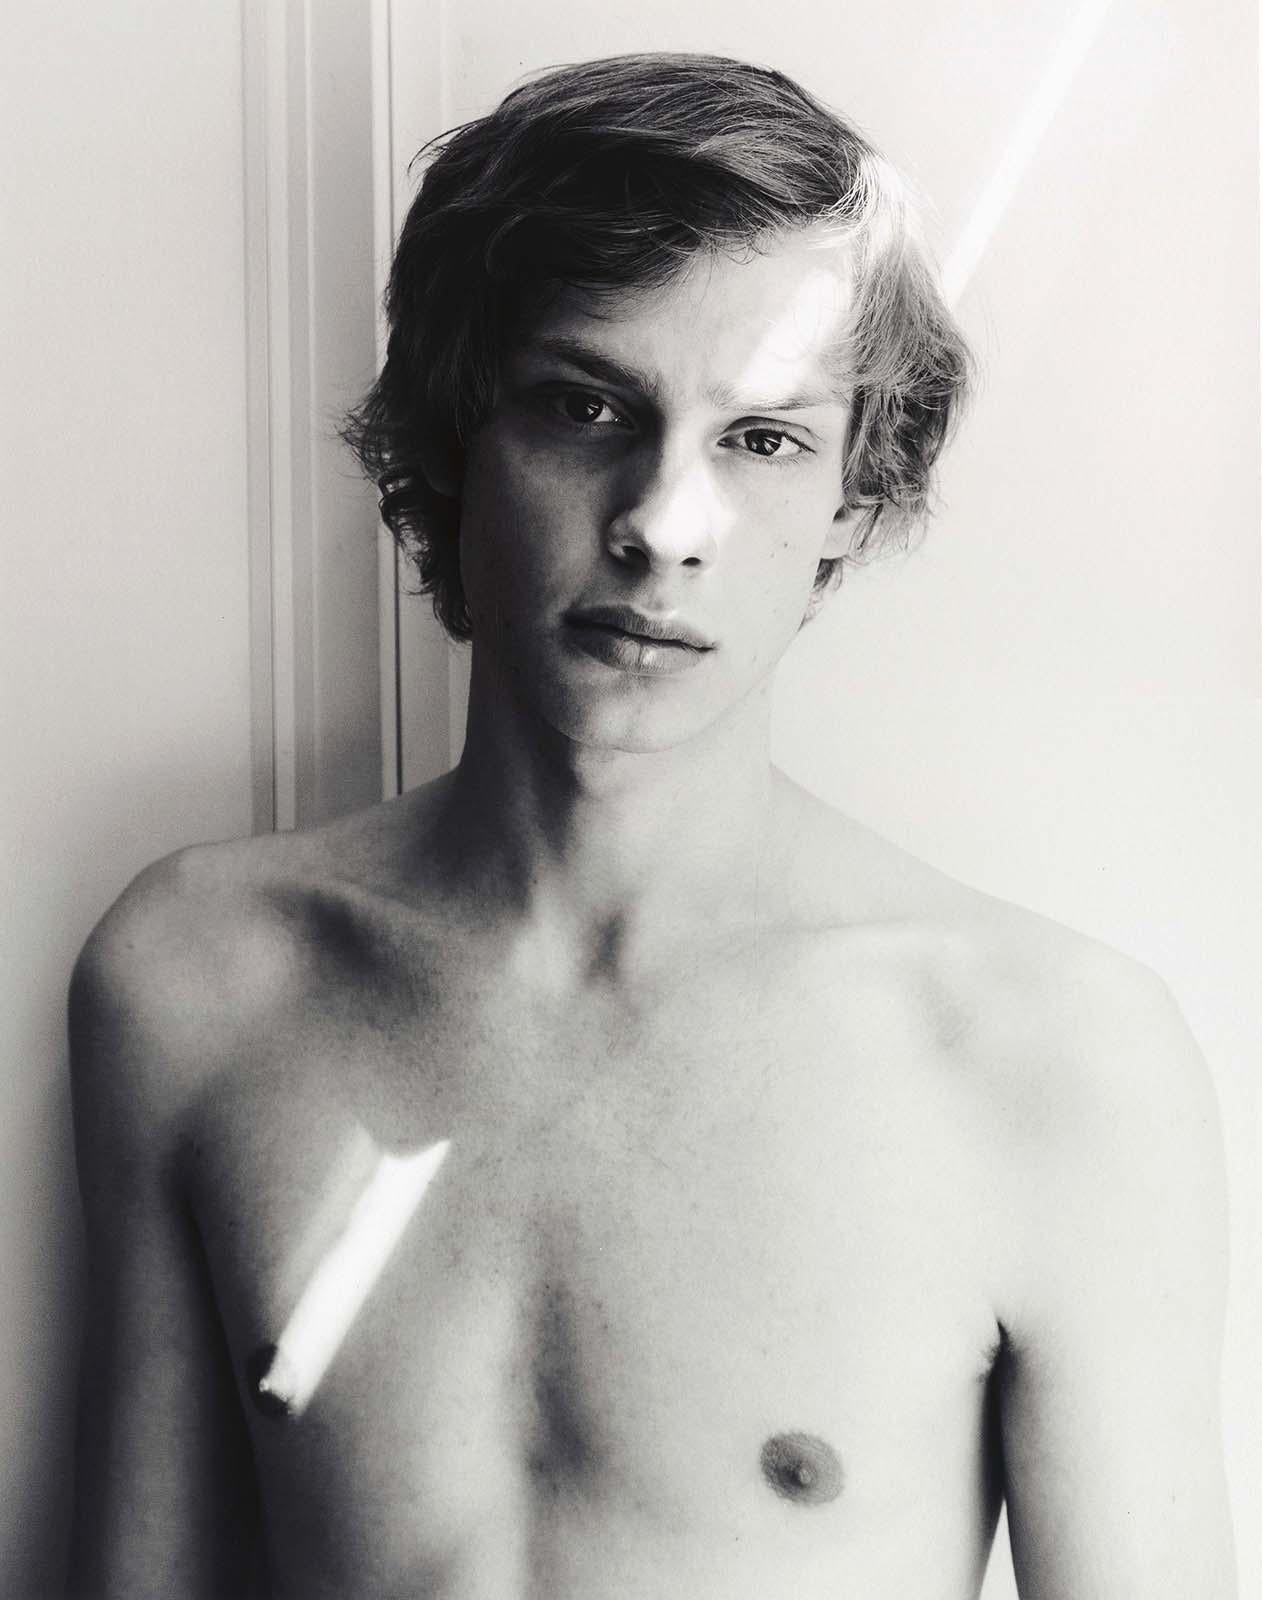 Alex Avgud Figurative Photograph - Jay and a Ray of Sun (the sun slants across young man's body from eye to nipple)